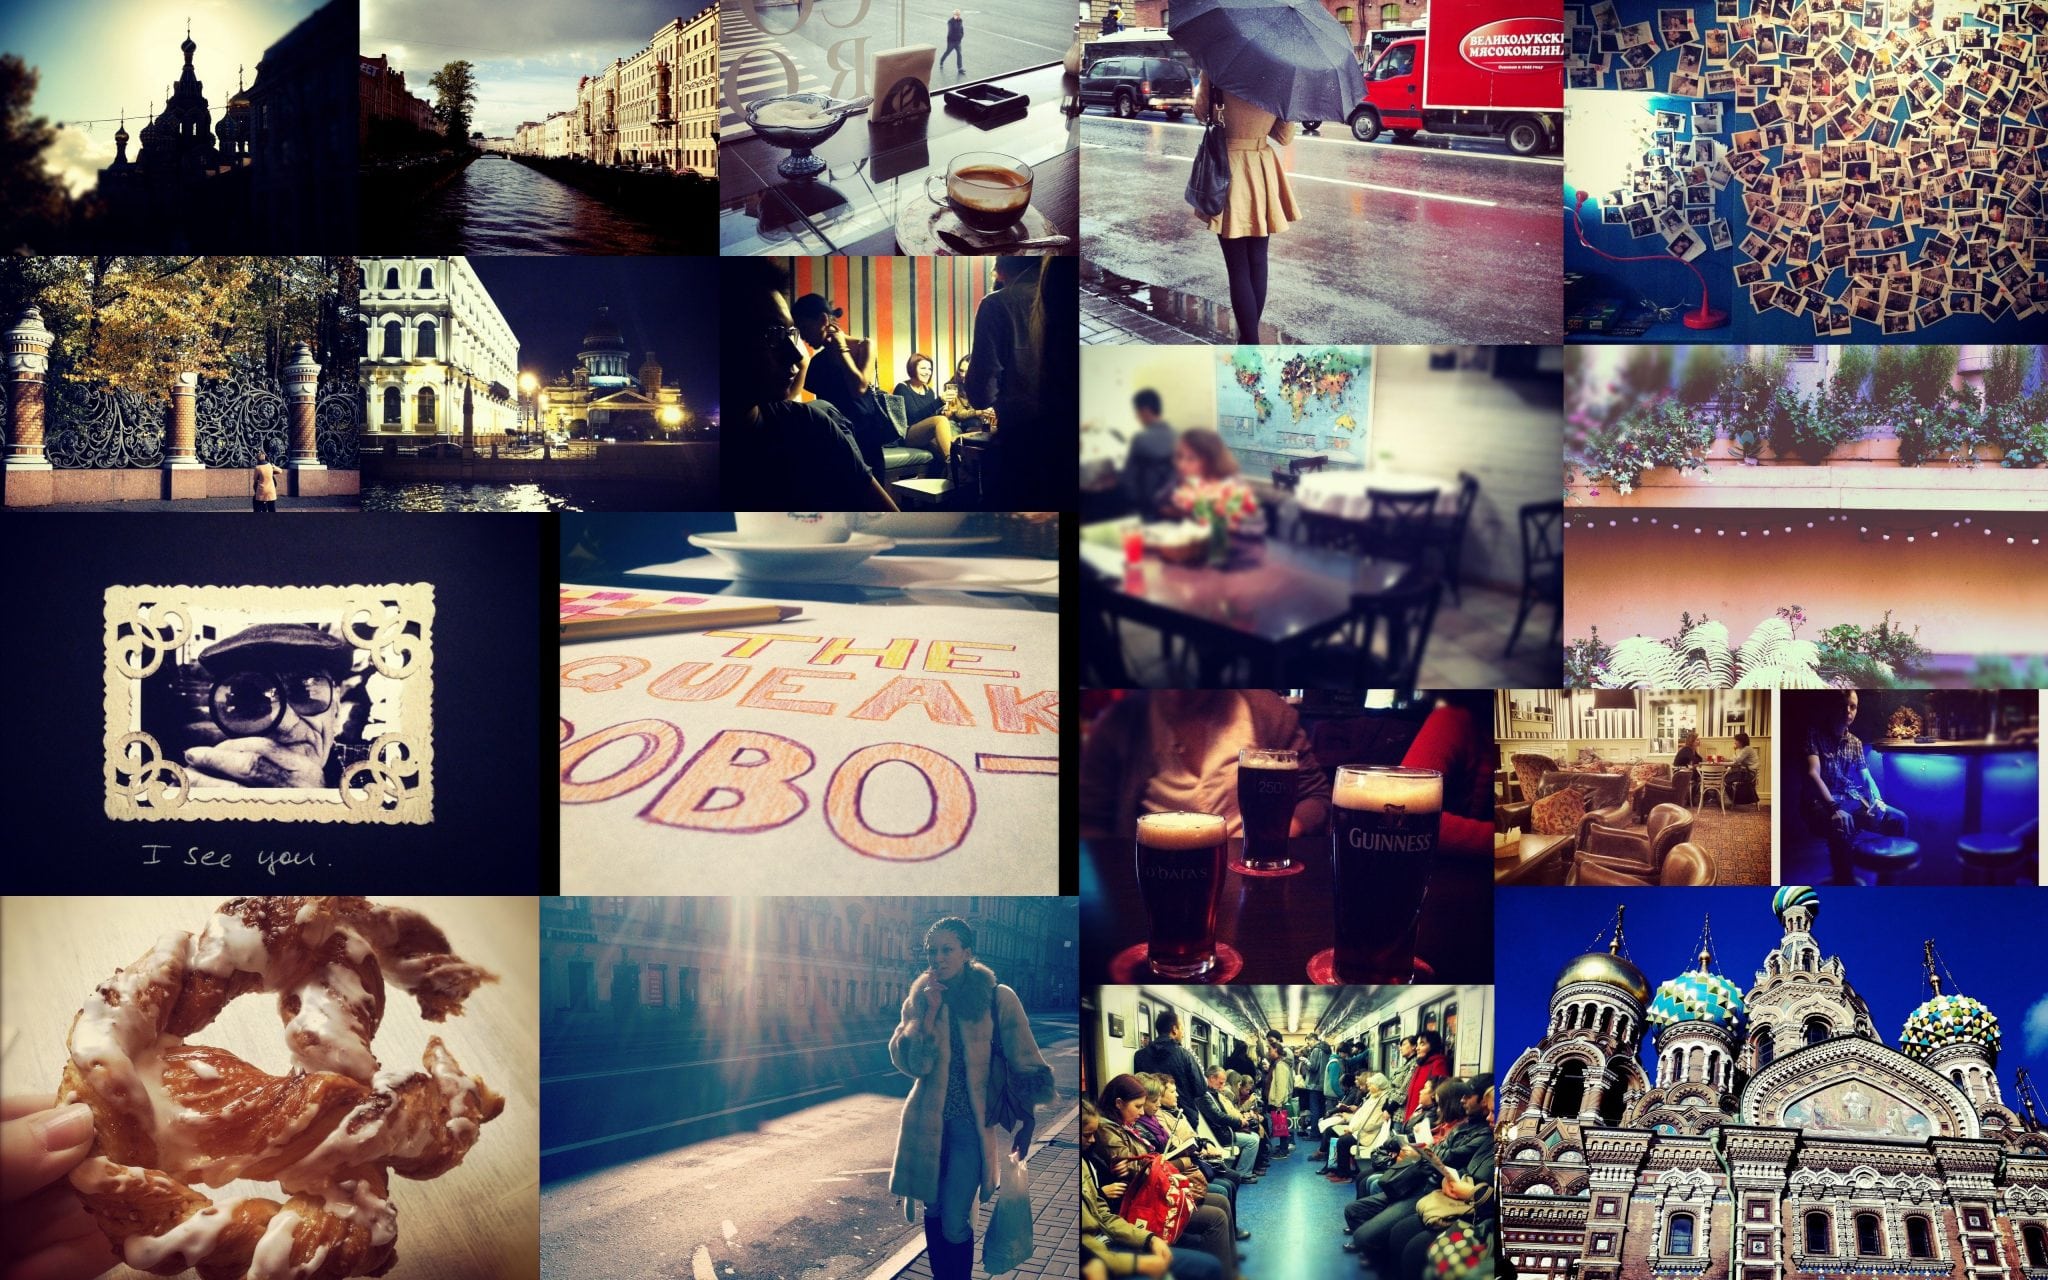 Instagram & travel marketing, made for each other.